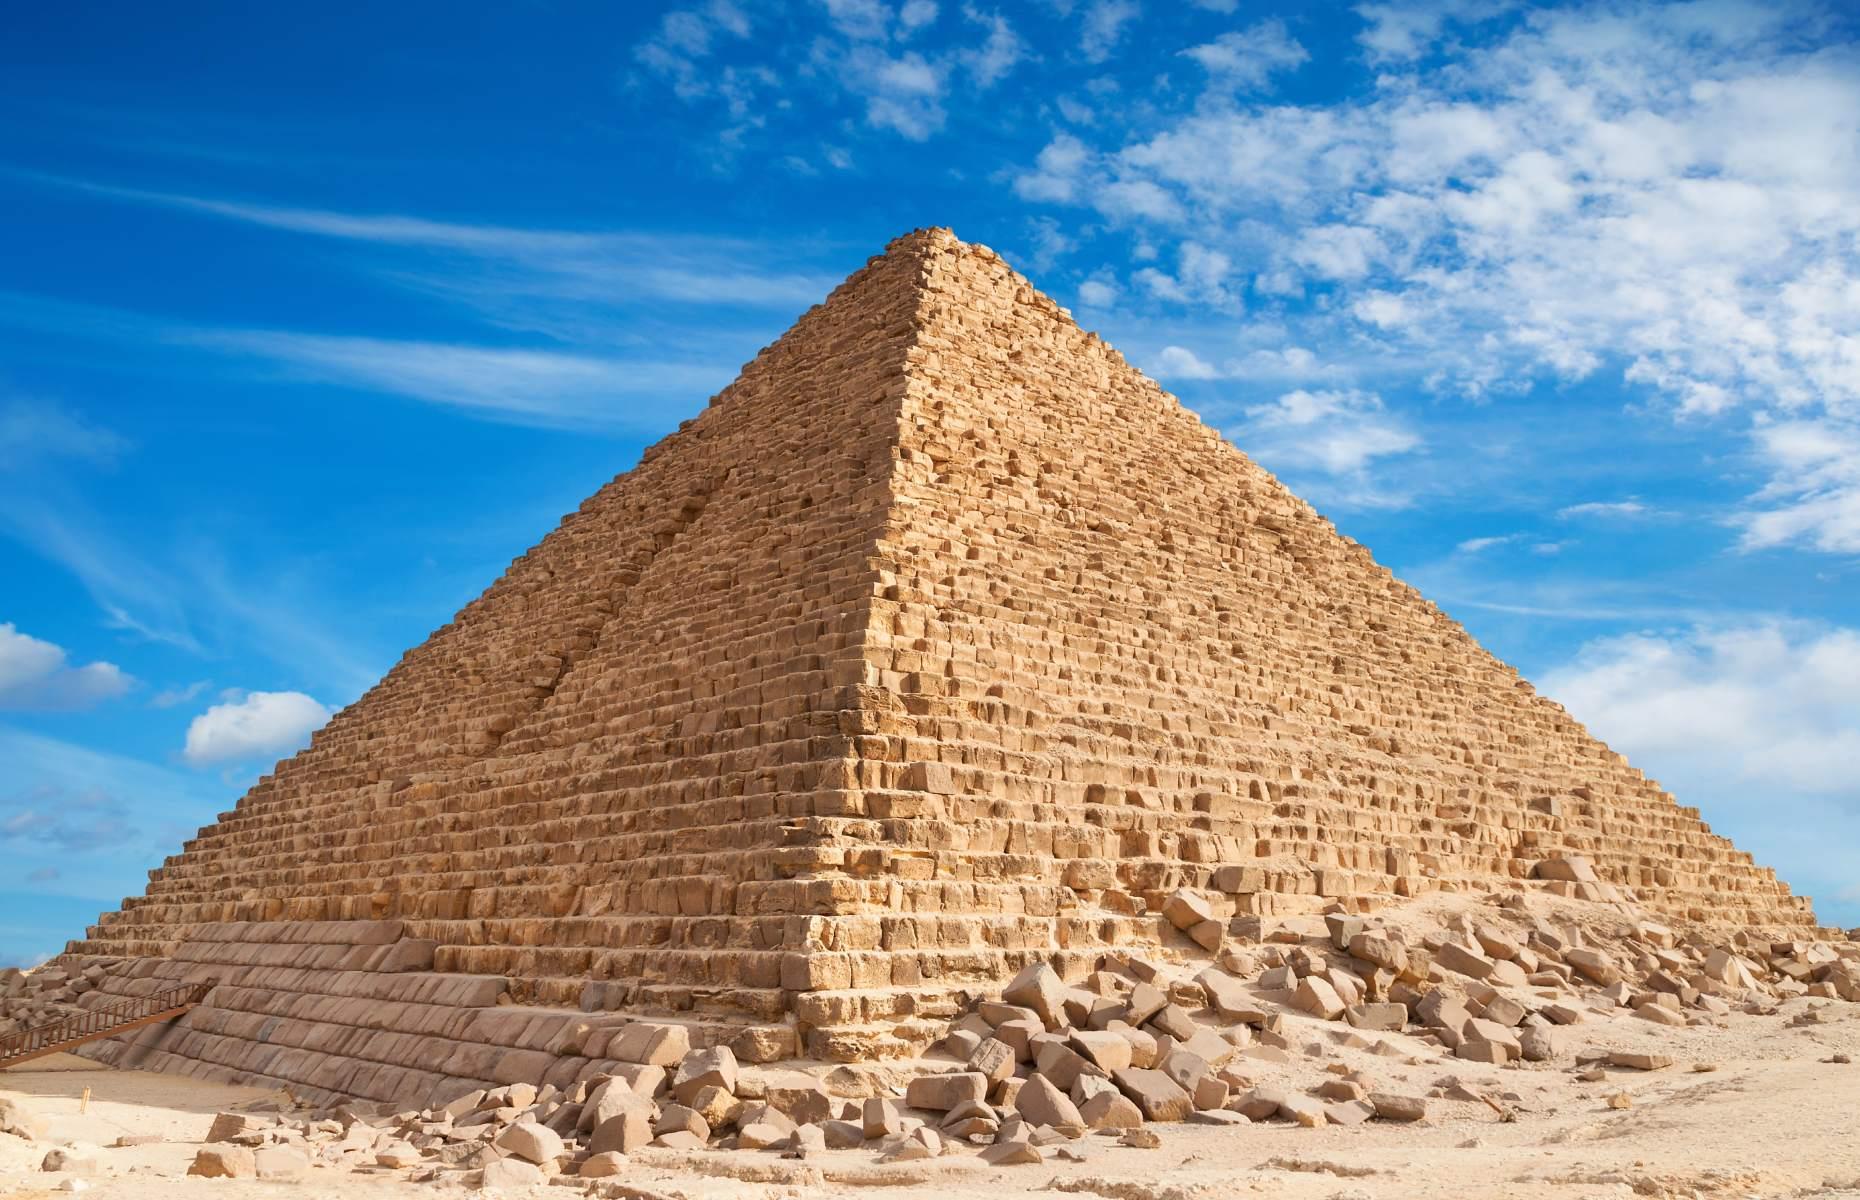 <p>The Great Pyramids of Giza consist of three pyramids, each named after the king they contained: Khufu, Khafre and Menkaure. Khufu Pyramid is the largest of the three, standing at a height of 482 feet (147m). It was constructed between 2550 and 2490 BC, using a whopping 2.3 million stone blocks. King Khufu ruled between 2589 and 2566 BC and was the second pharaoh of the Fourth Dynasty. </p>